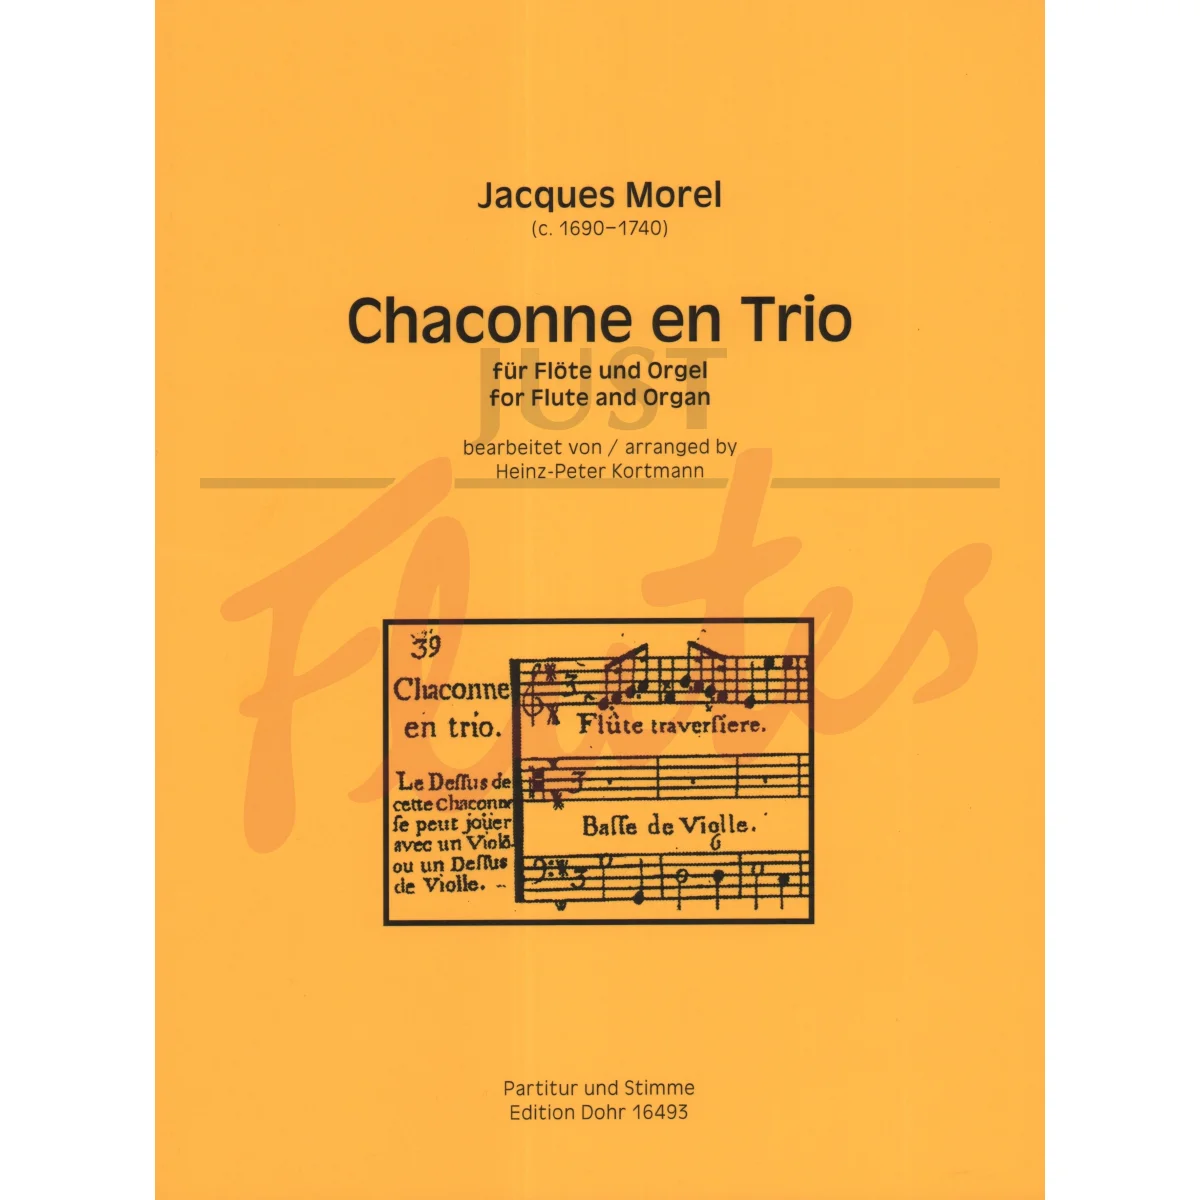 Chaconne en Trio for Flute and Organ